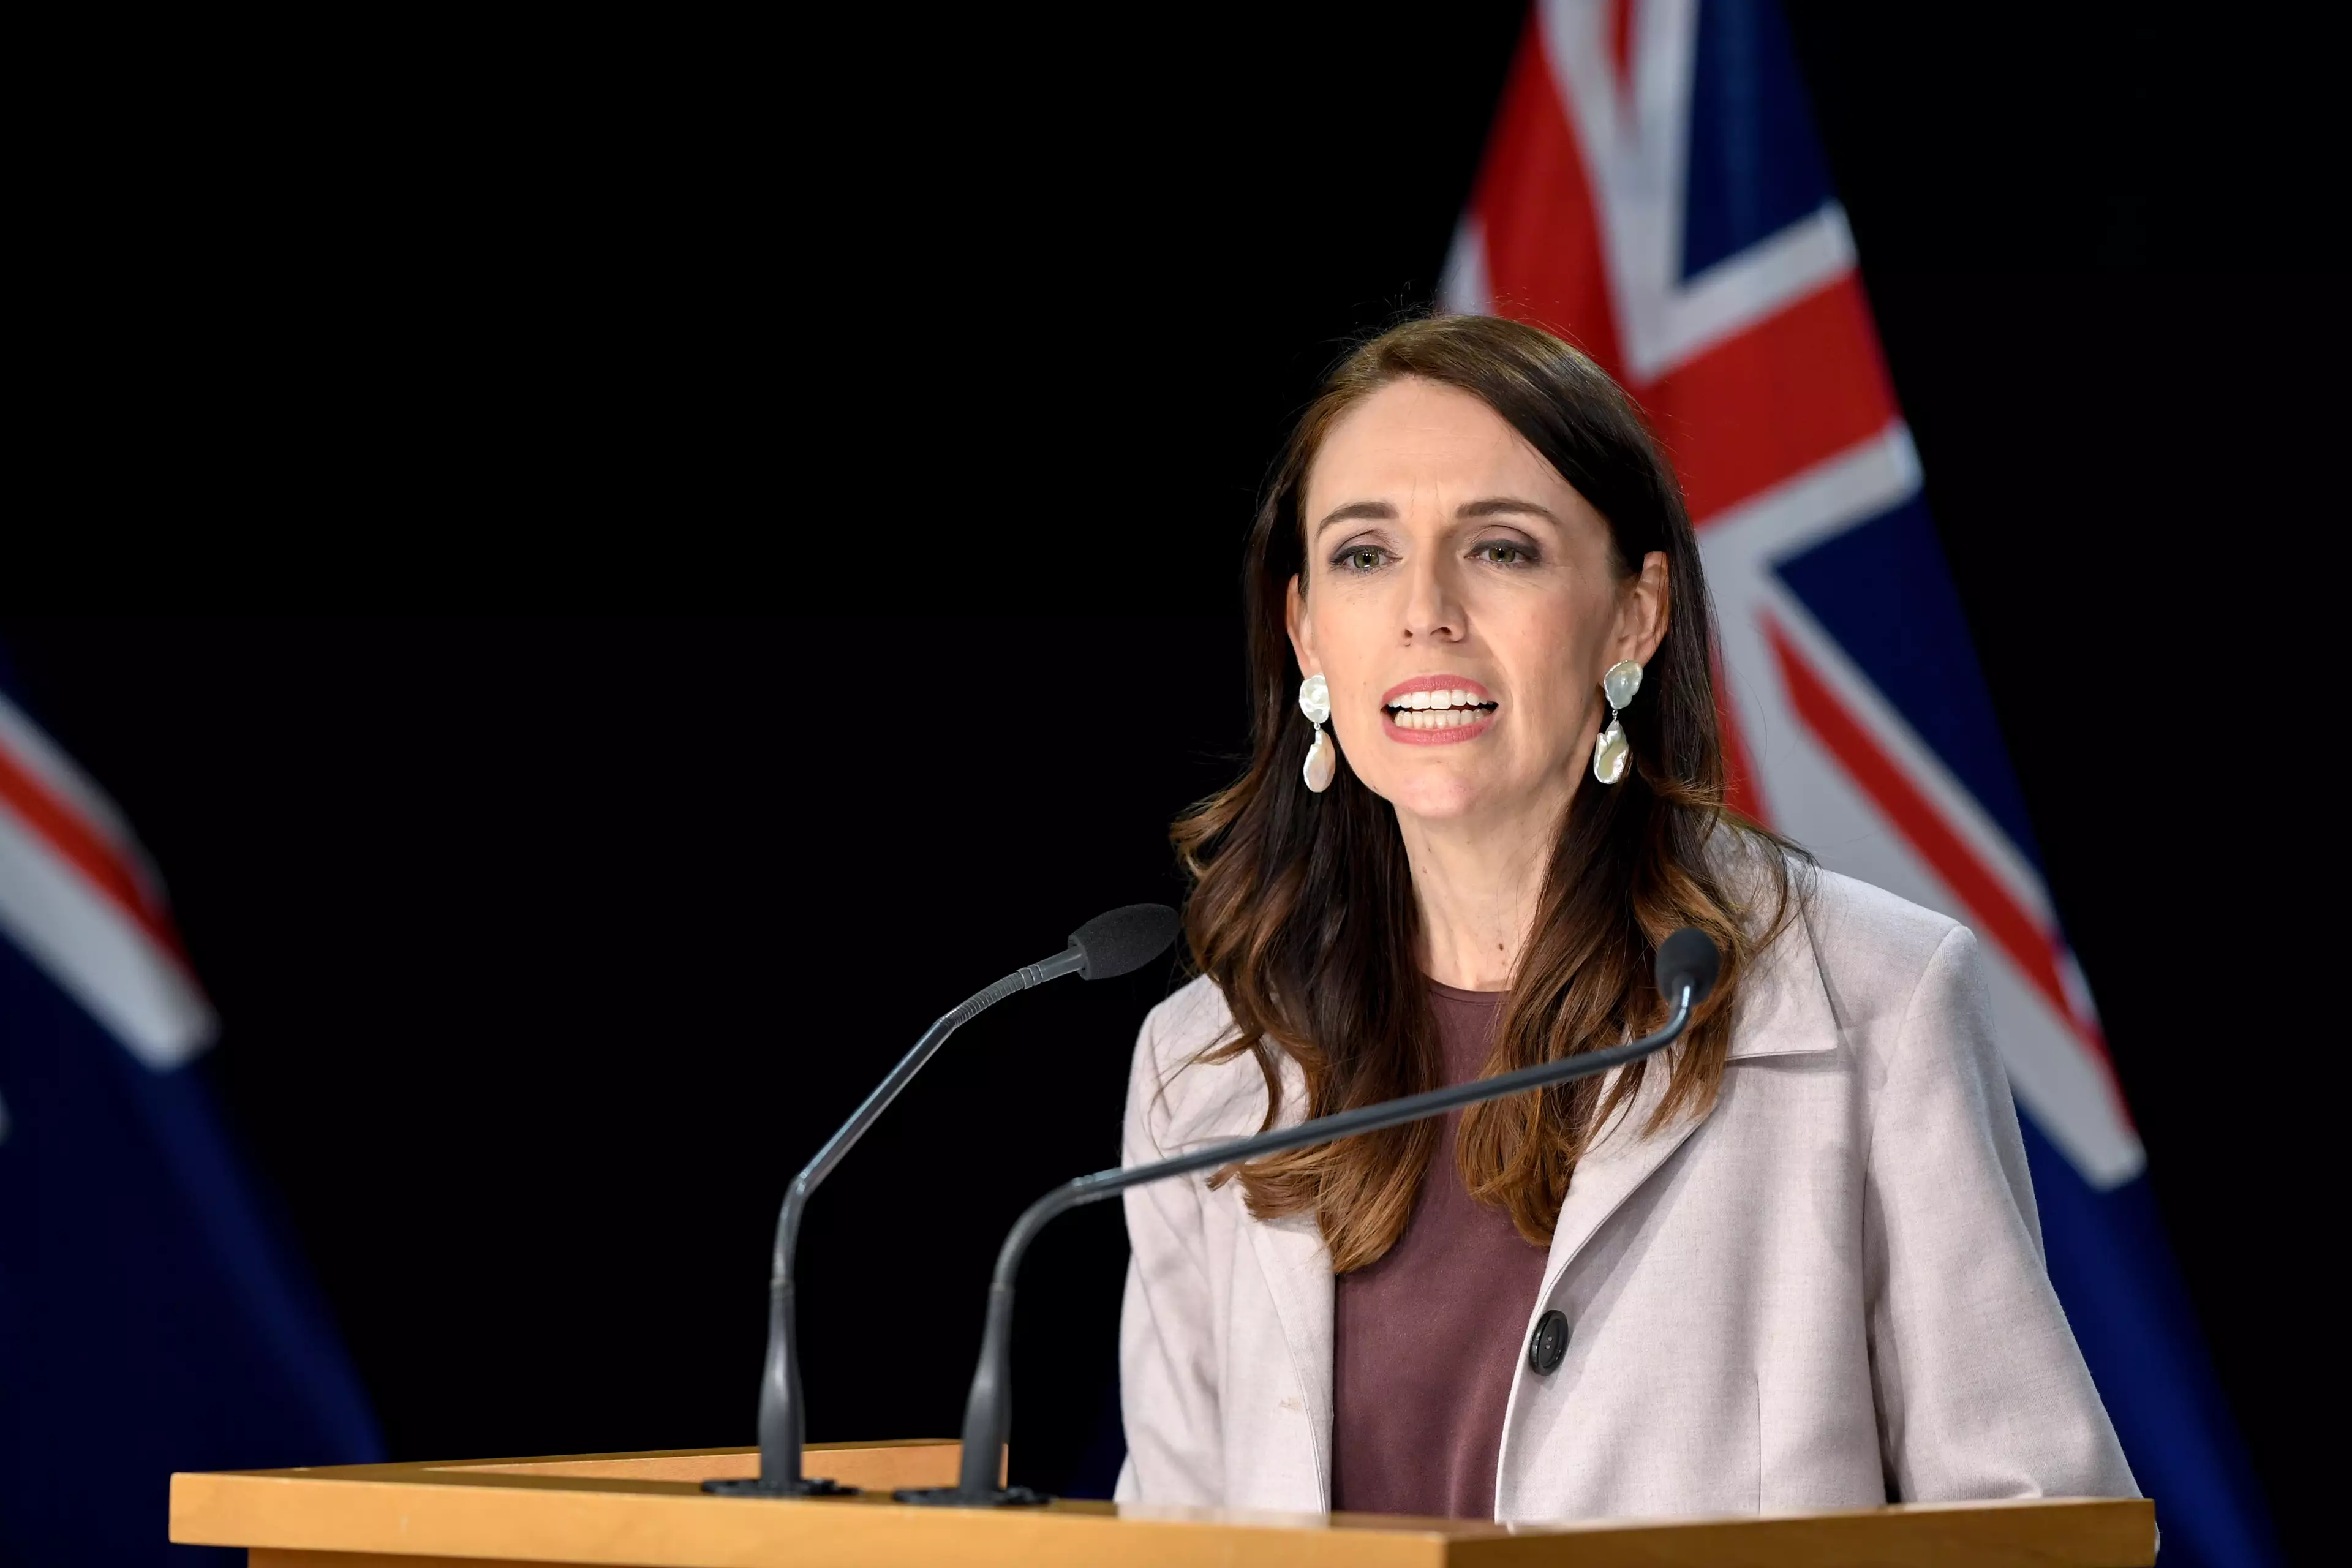 Prime Minister Jacinda Ardern has announced that all schools in New Zealand will offer free period products (